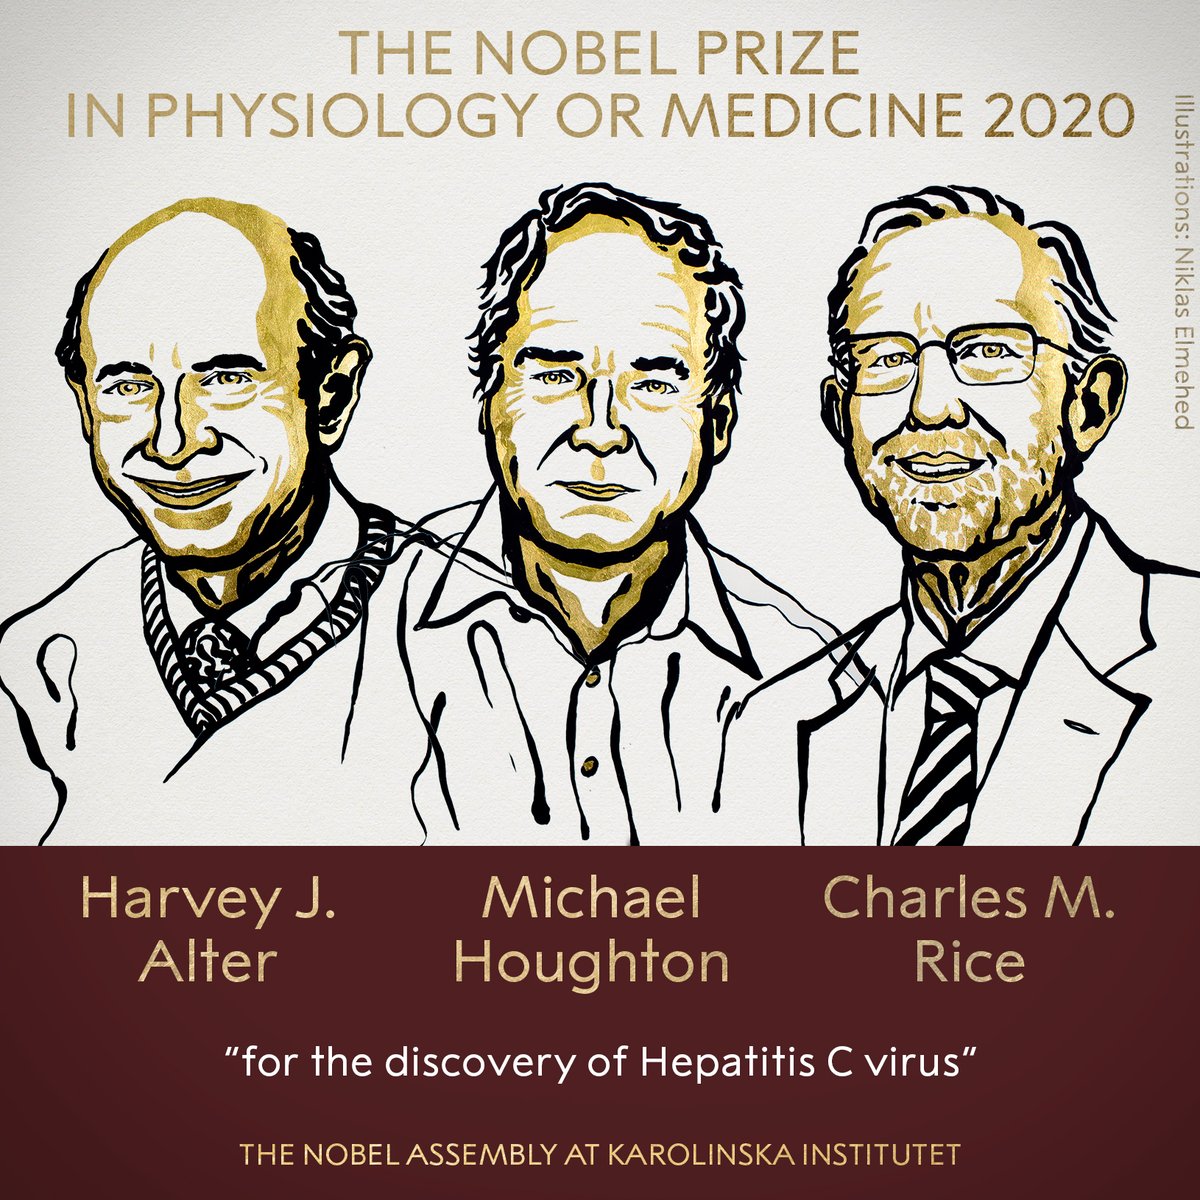 BREAKING NEWS: 
The 2020 #NobelPrize in Physiology or Medicine has been awarded jointly to Harvey J. Alter, Michael Houghton and Charles M. Rice “for the discovery of Hepatitis C virus.”